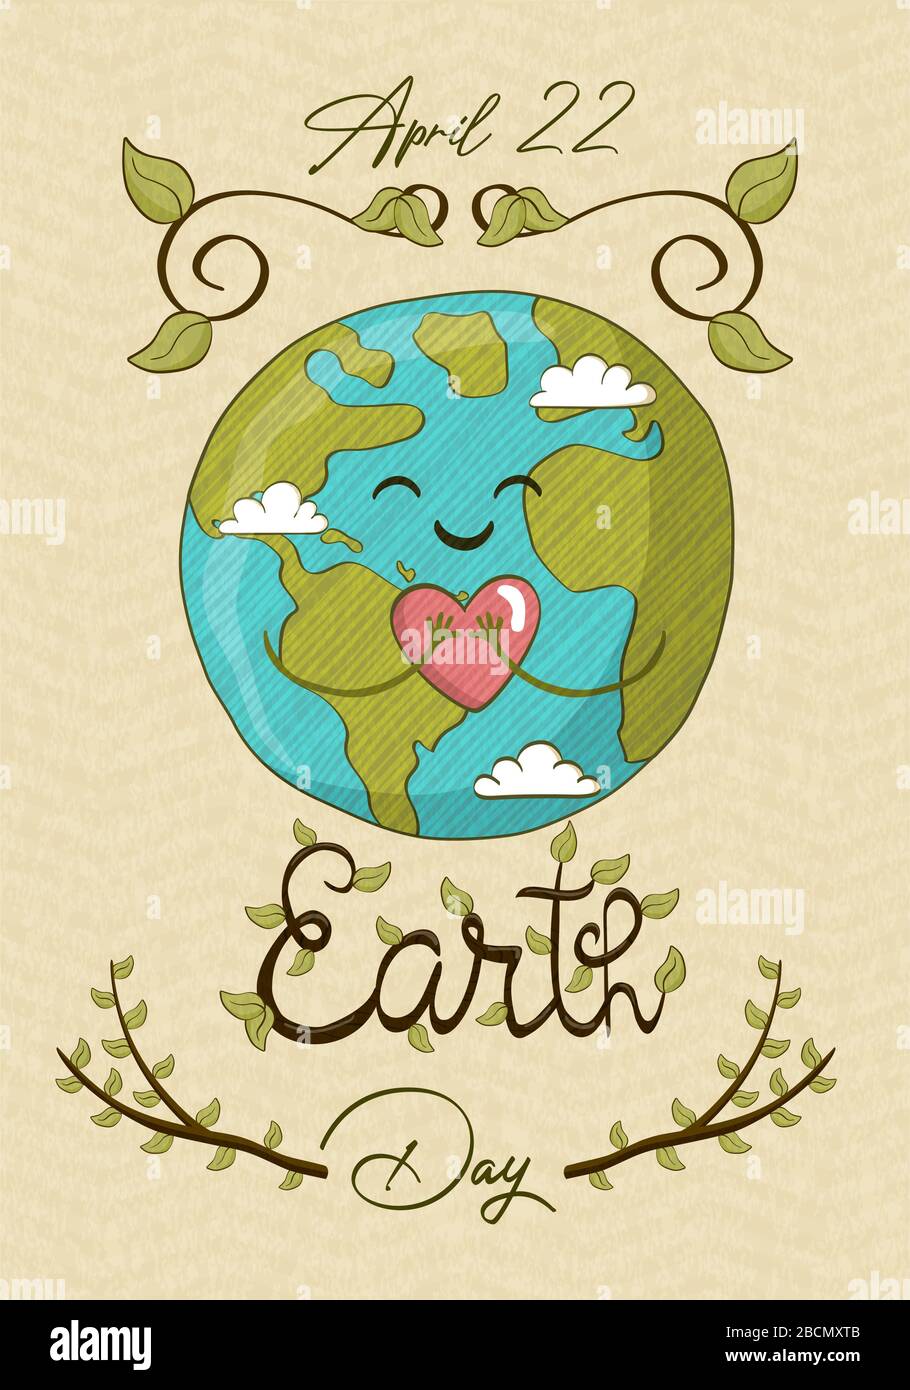 Happy earth day, april 22 environment help event for worldwide nature care awareness. Cute hand drawn planet holding hearth, green world love cartoon Stock Vector